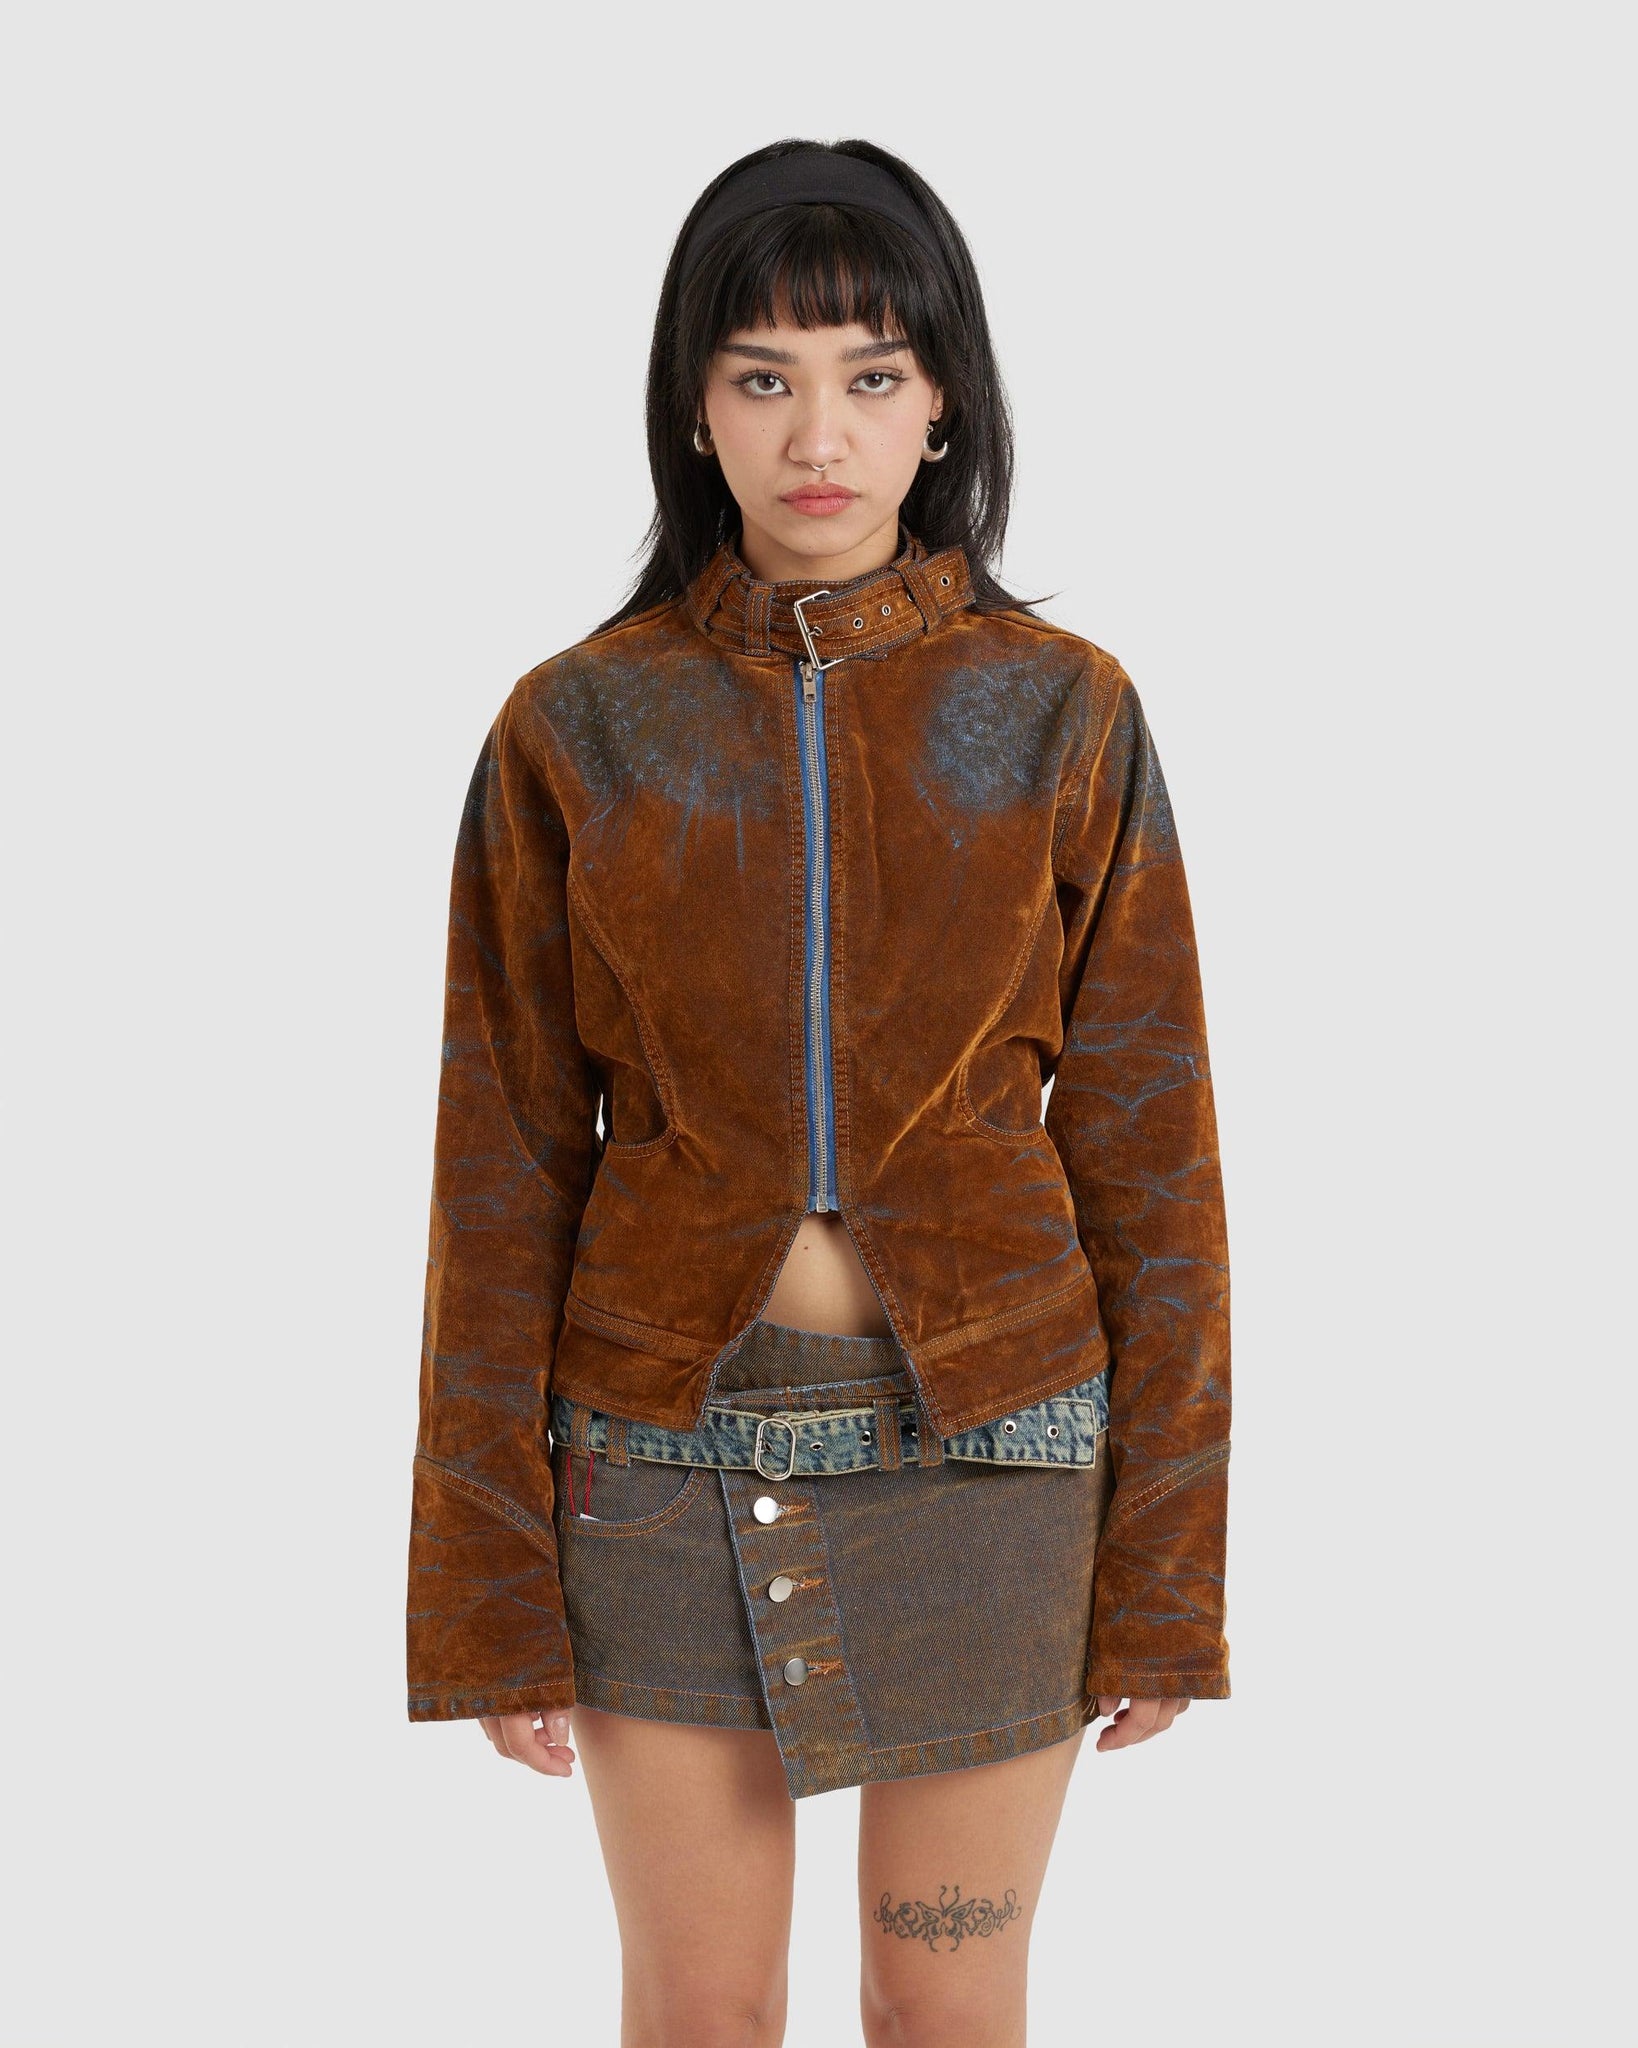 Racing Jacket Burned Brown - {{ collection.title }} - Chinatown Country Club 